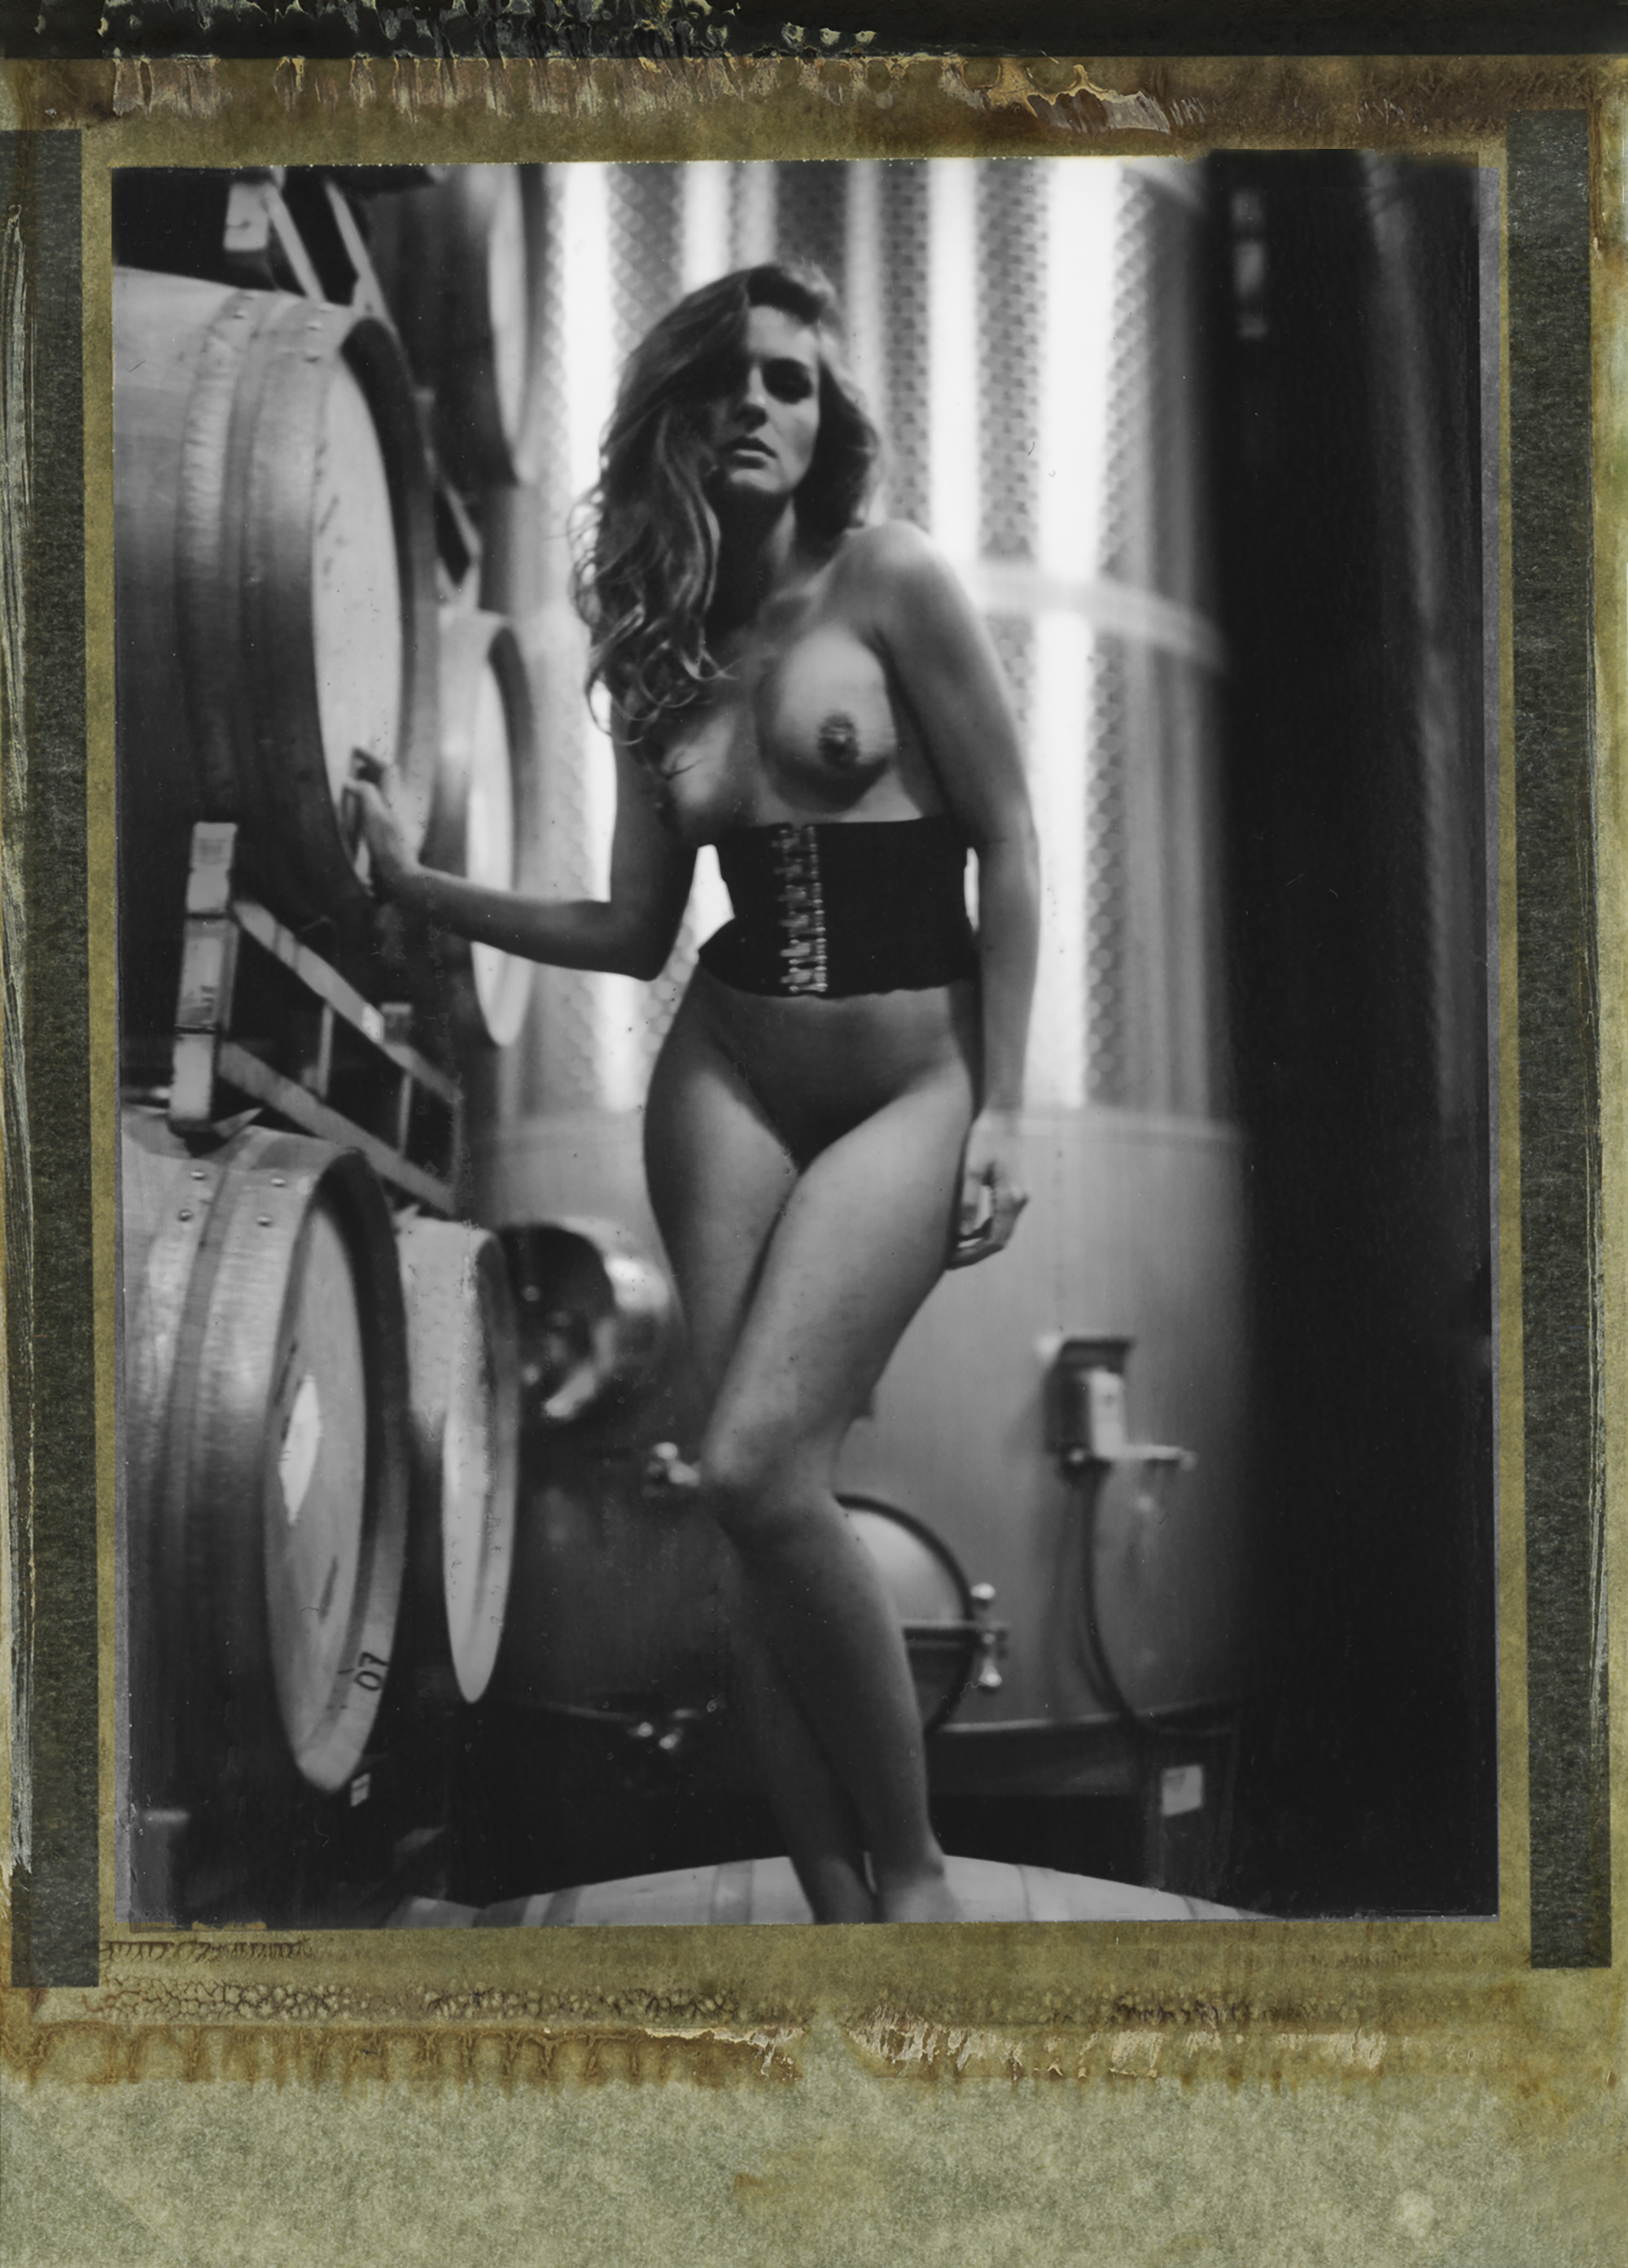 a naked woman stands next to barrels wearing a corset around her waist